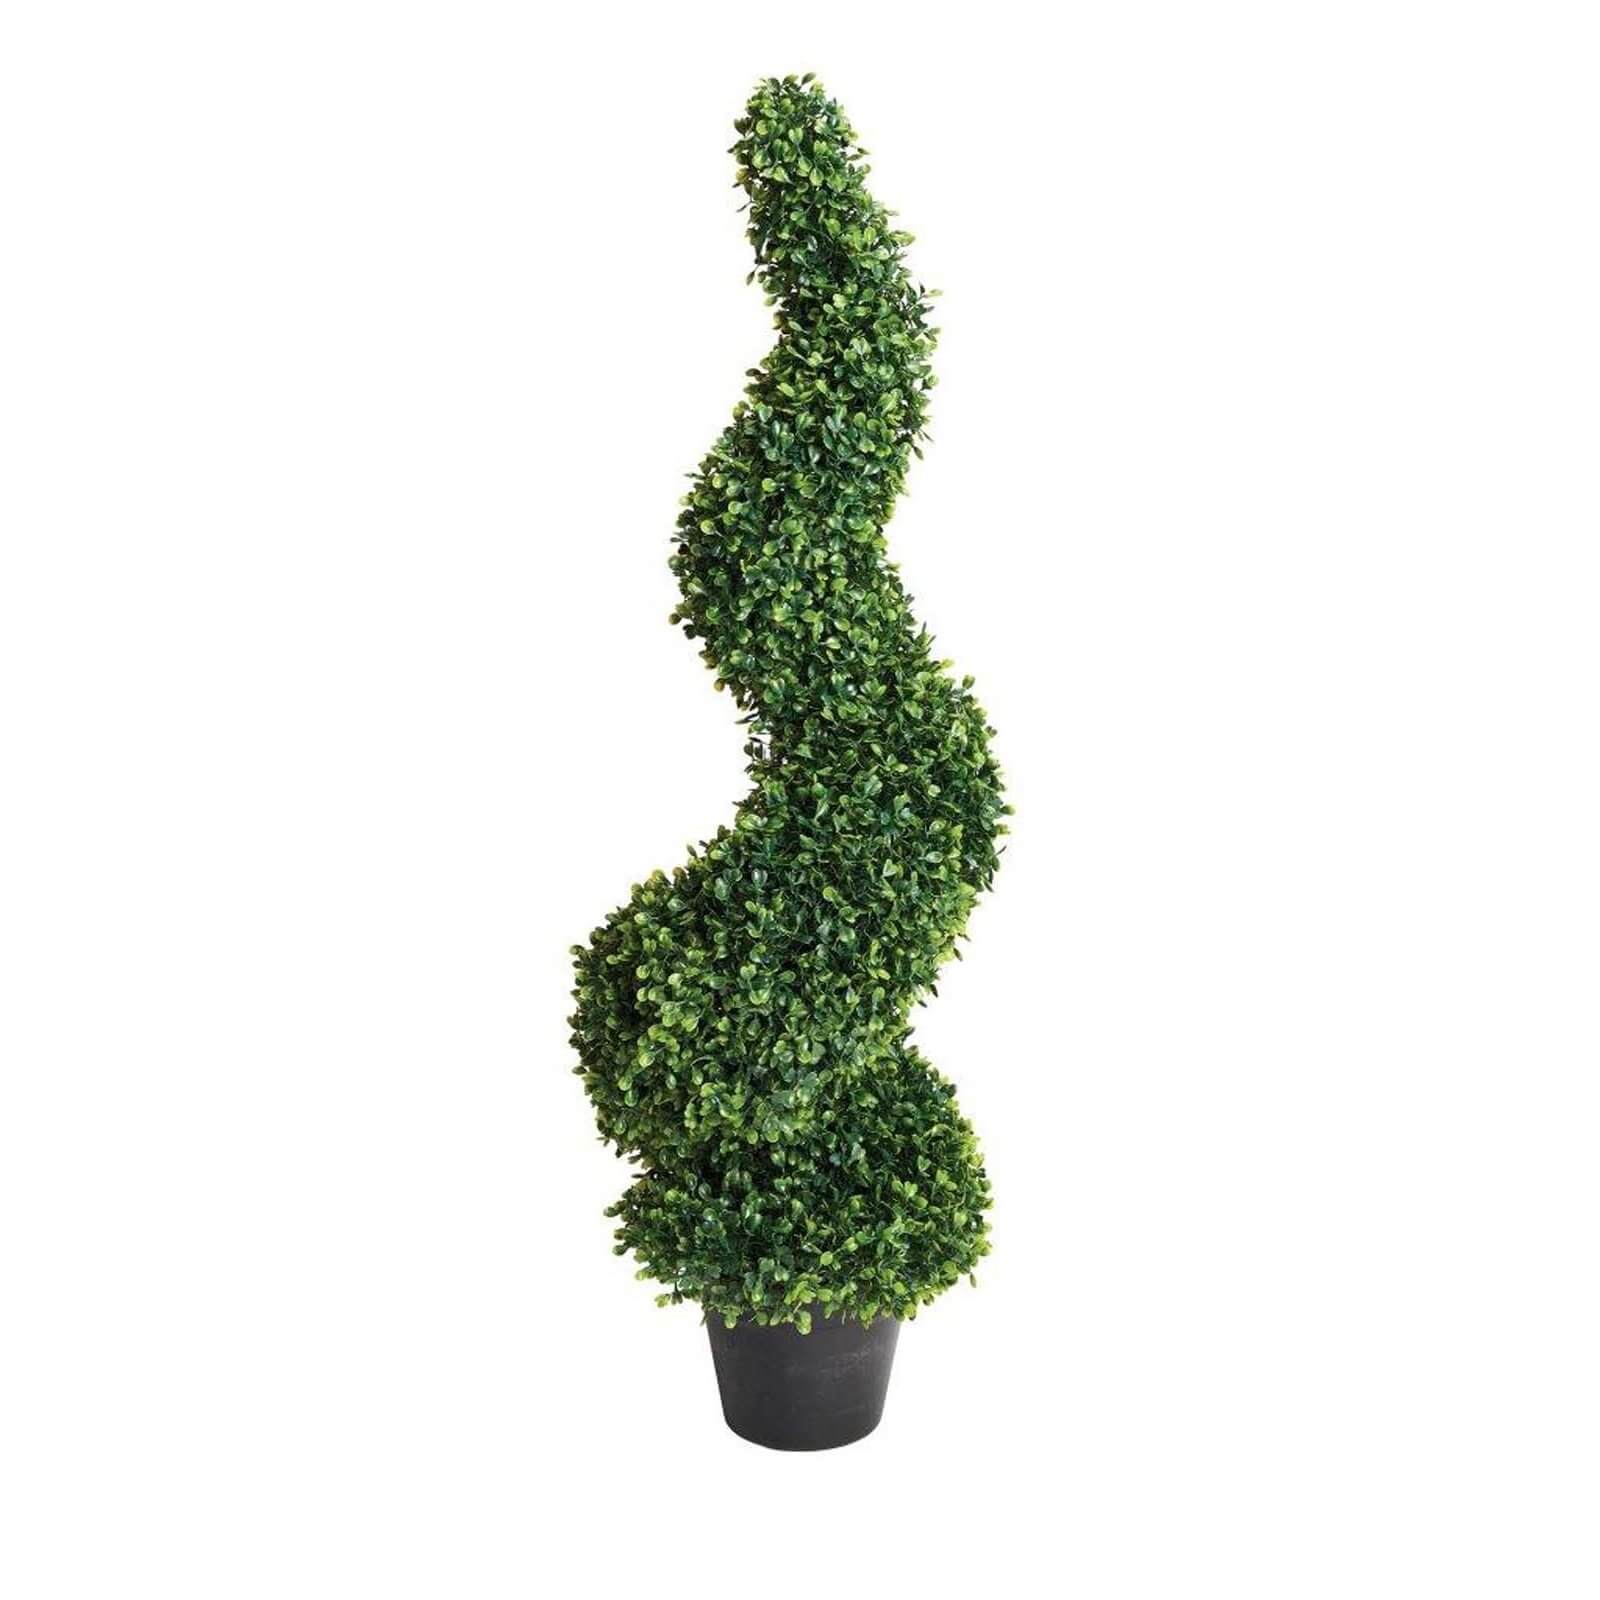 Photo of Small Spiral Artificial Topiary Tree